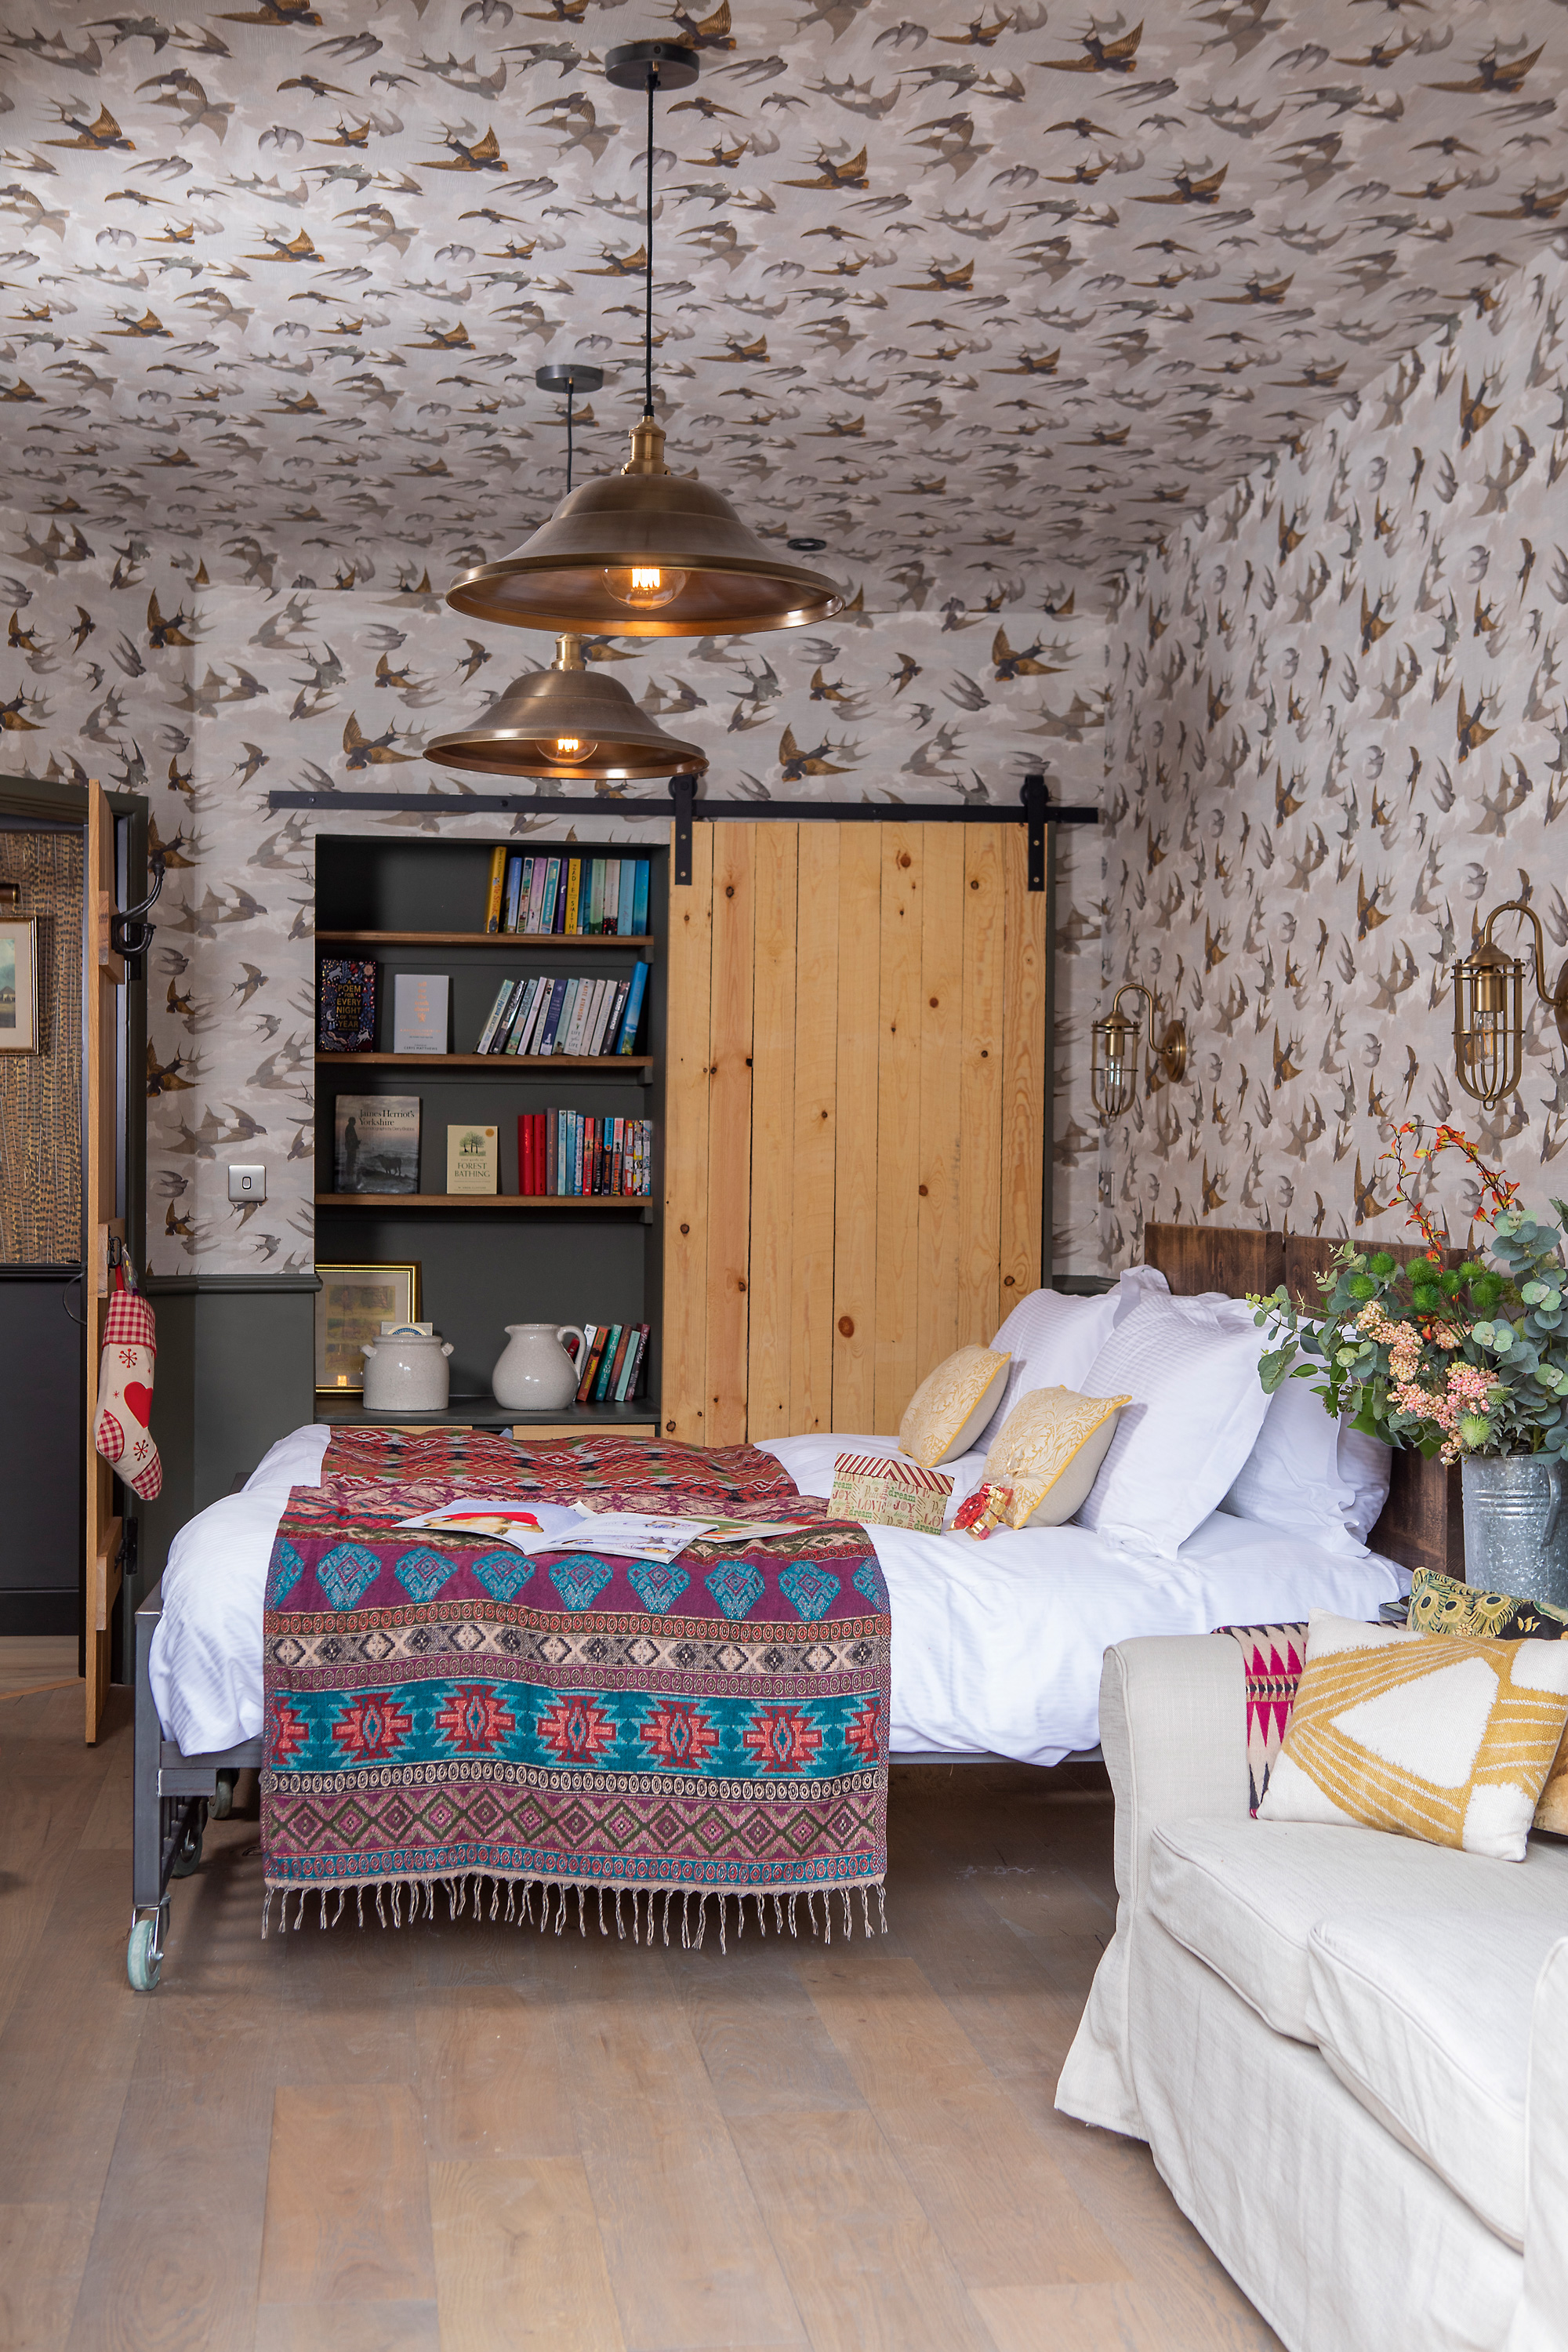 With its rustic character and cosy interior, Karen and Adam Griggs' former worker's cottage comes into its own at Christmas